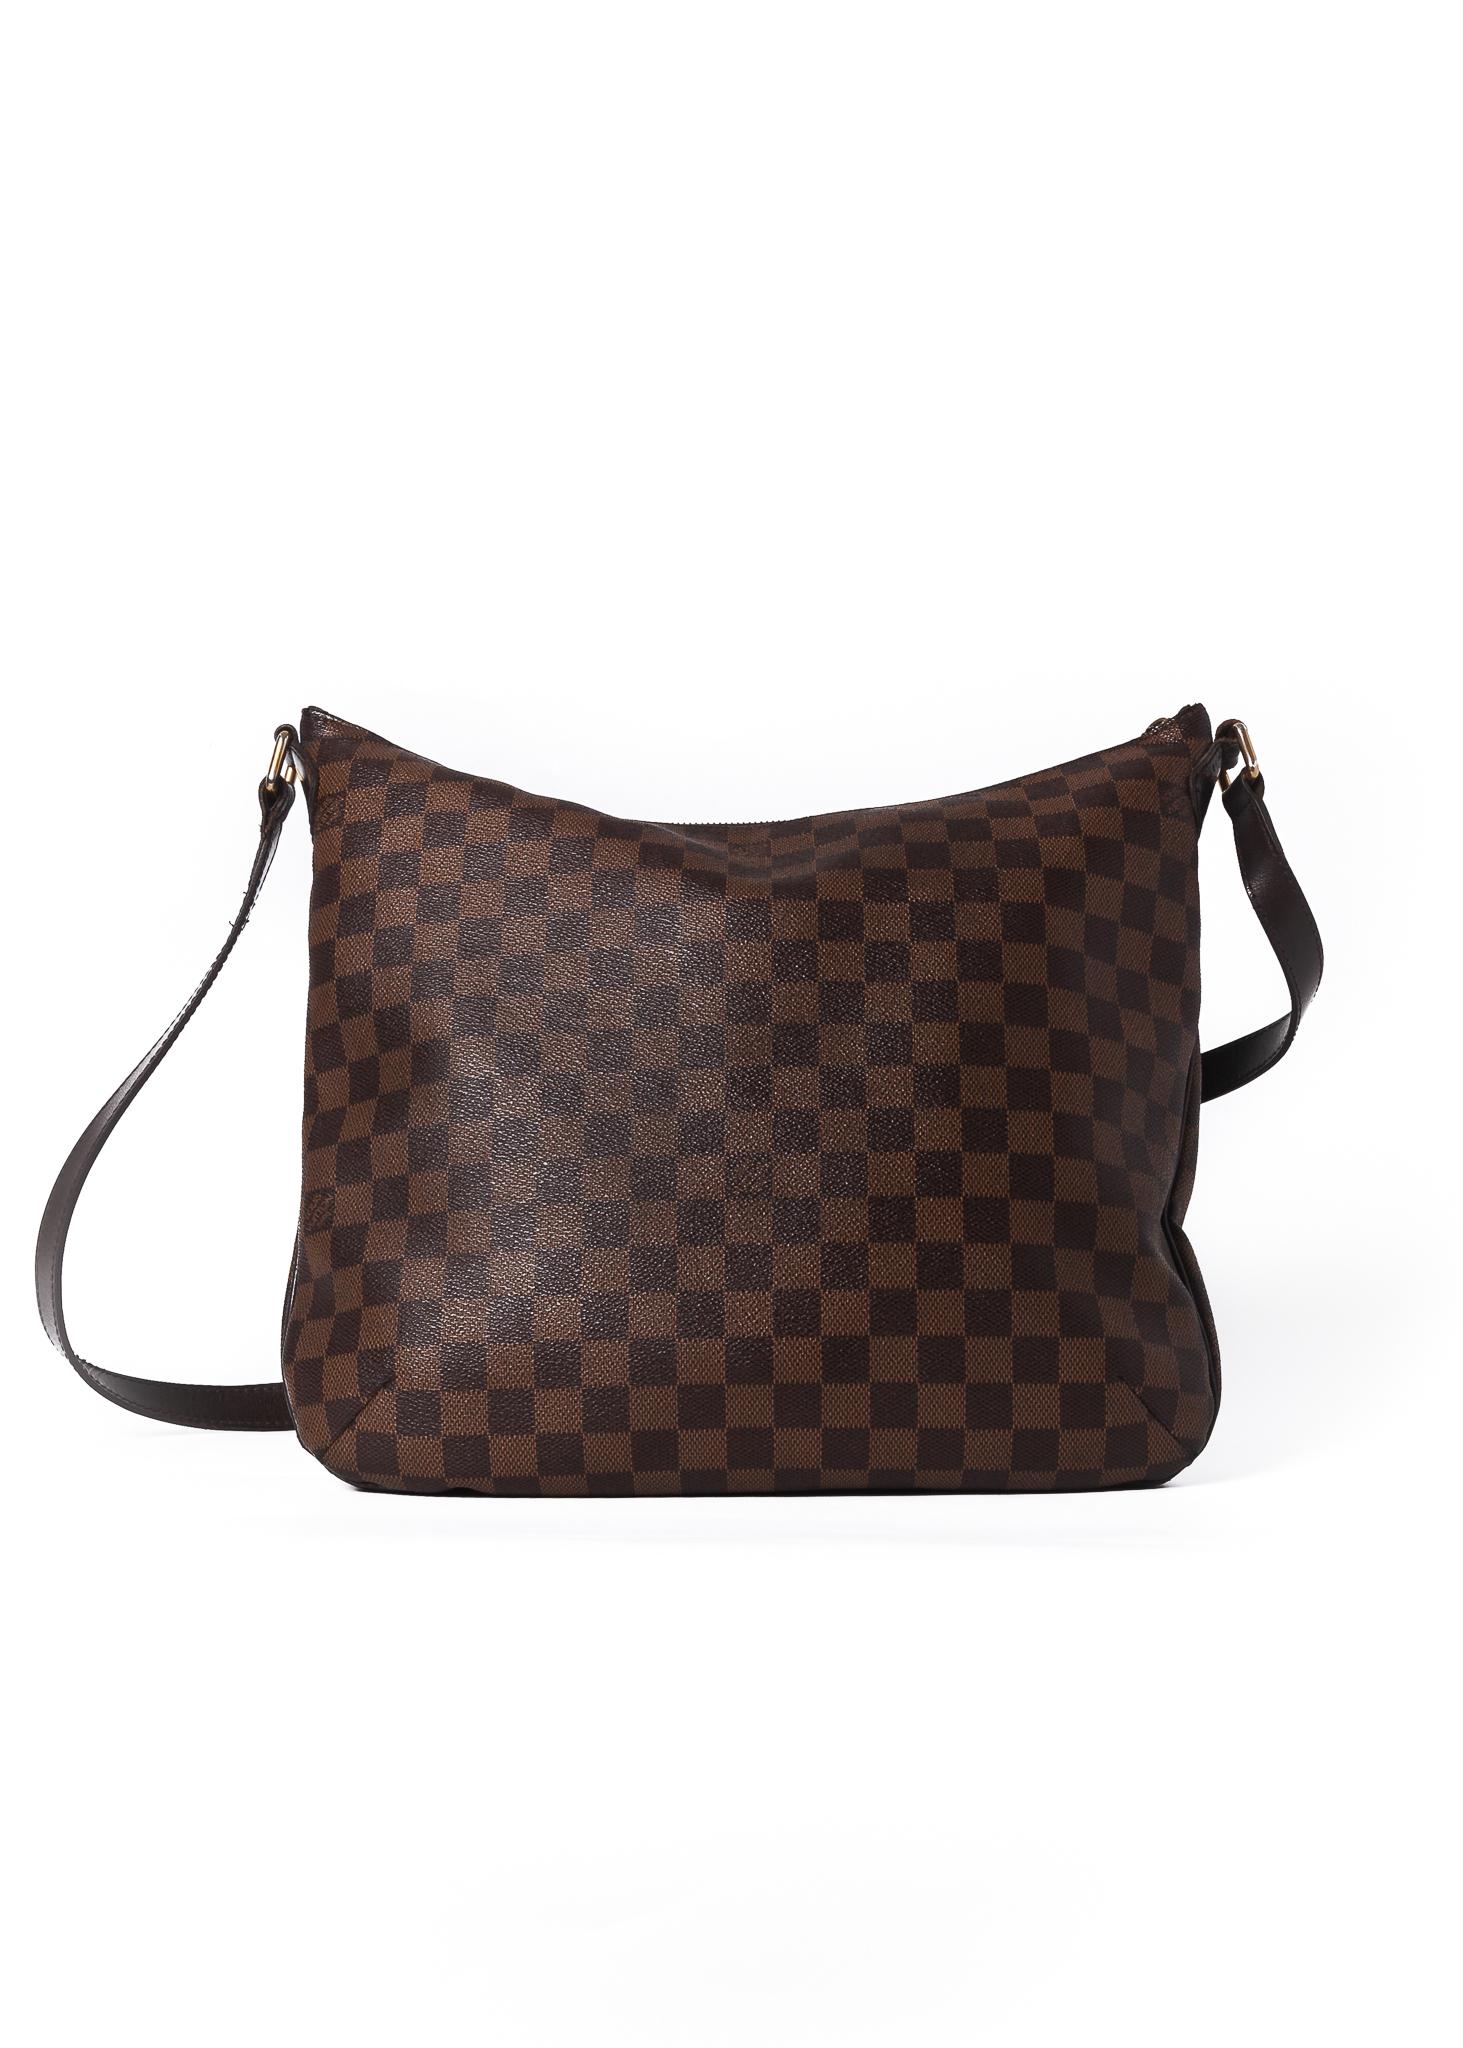 This Bloomsbury PM bag is made with Damier Ebene canvas and features brass hardware, exterior pocket, red woven fabric interior lining, top zip closure and an adjustable long shoulder strap. (Damier is French for checkerboard)

COLOR: Brown/Damier